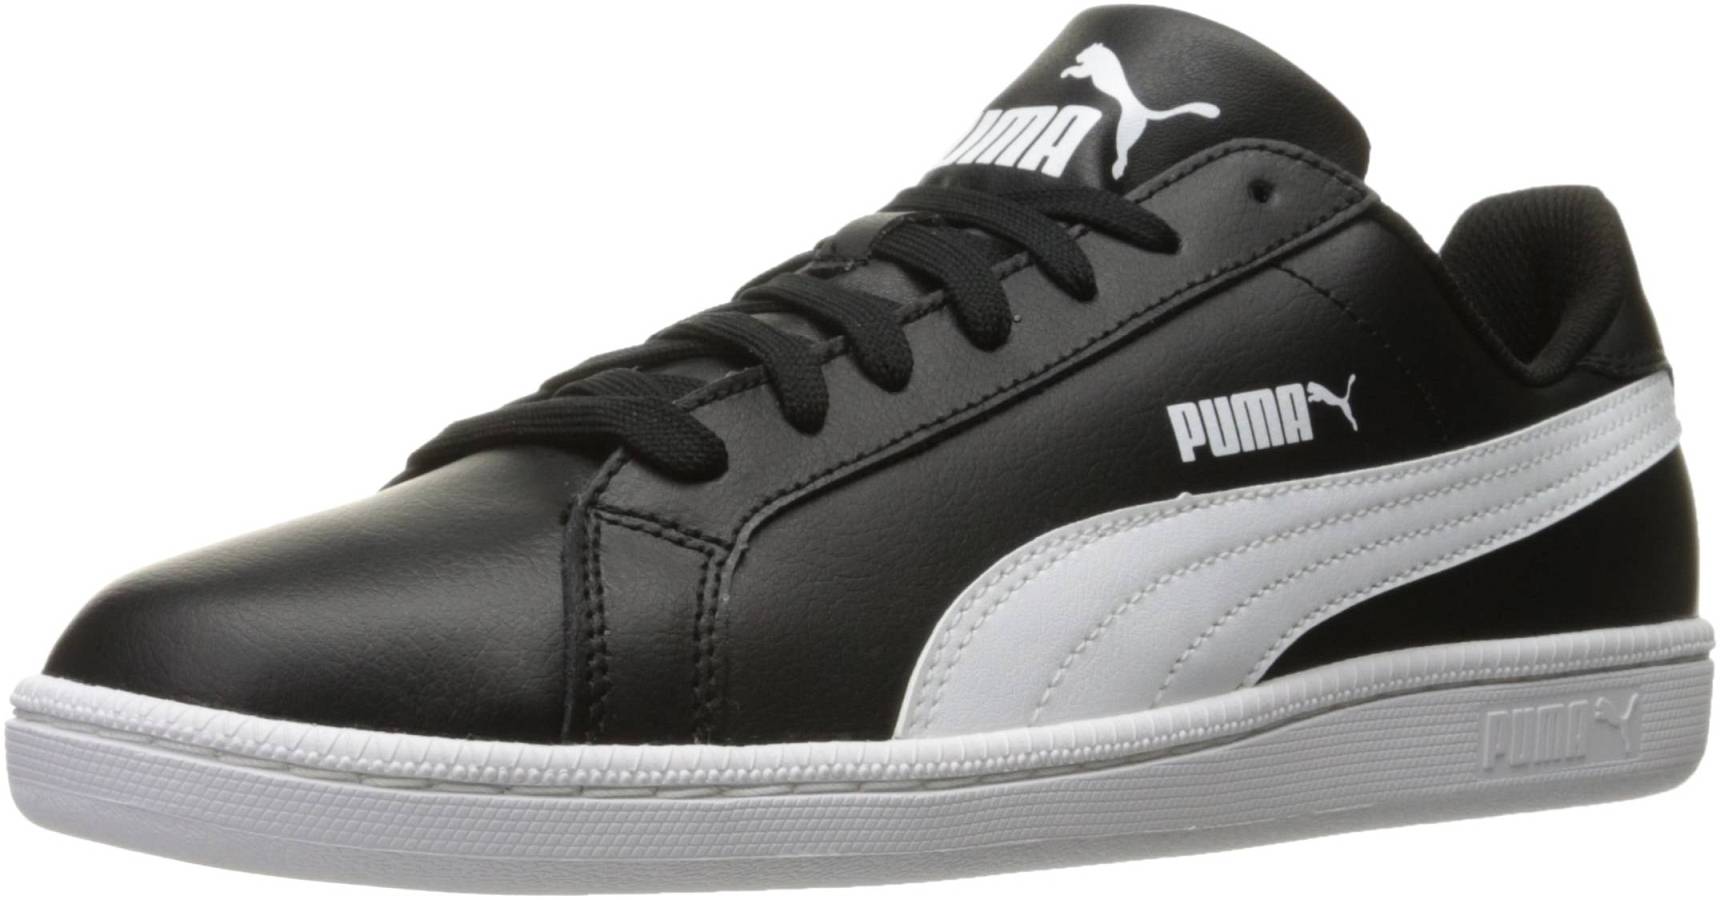 Puma Smash Leather – Shoes Reviews & Reasons To Buy